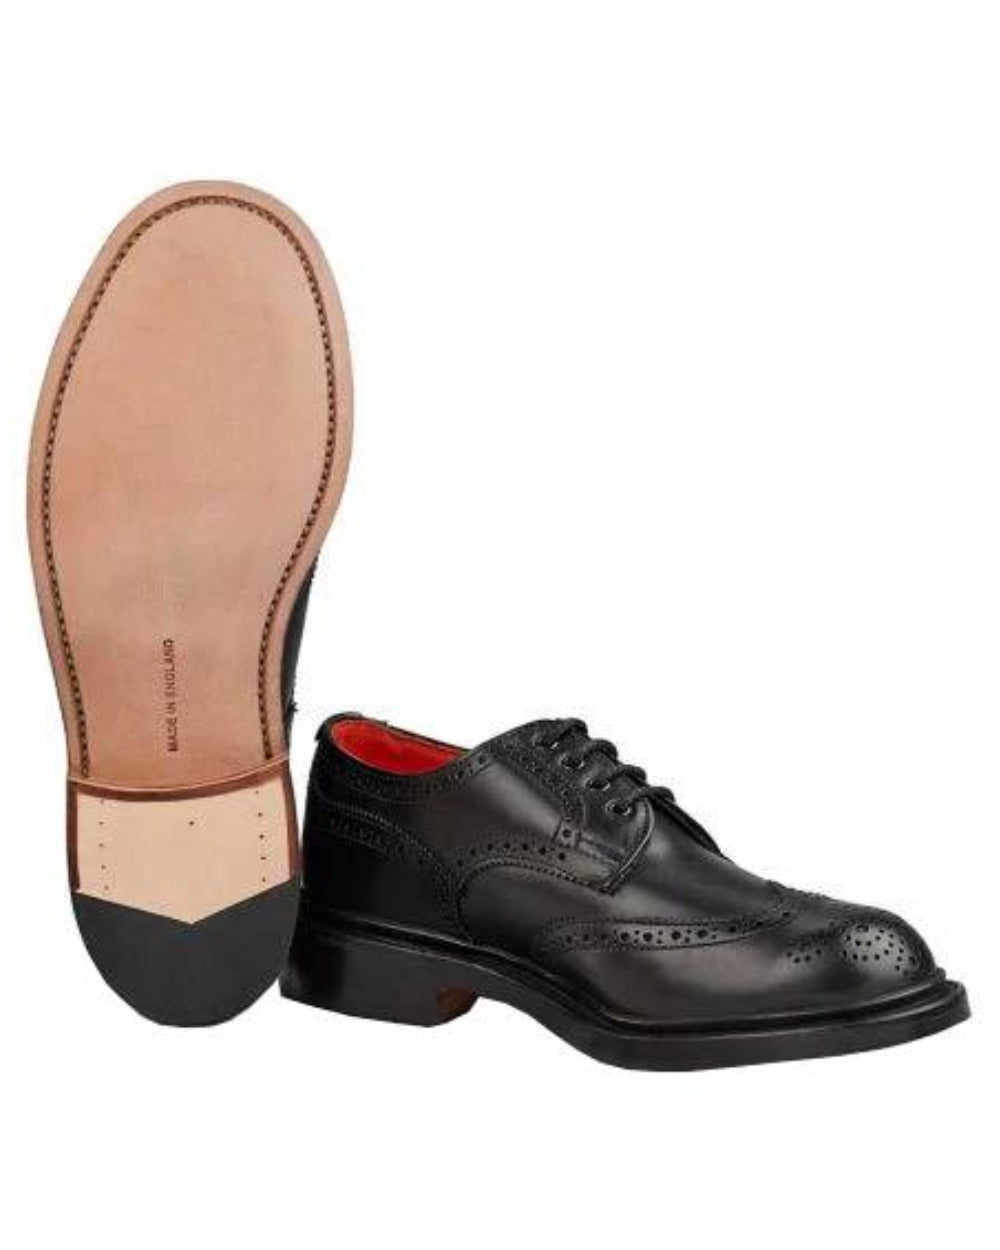 Black Coloured Trickers Anne Leather Sole Brogue Country Shoe On A White Background 